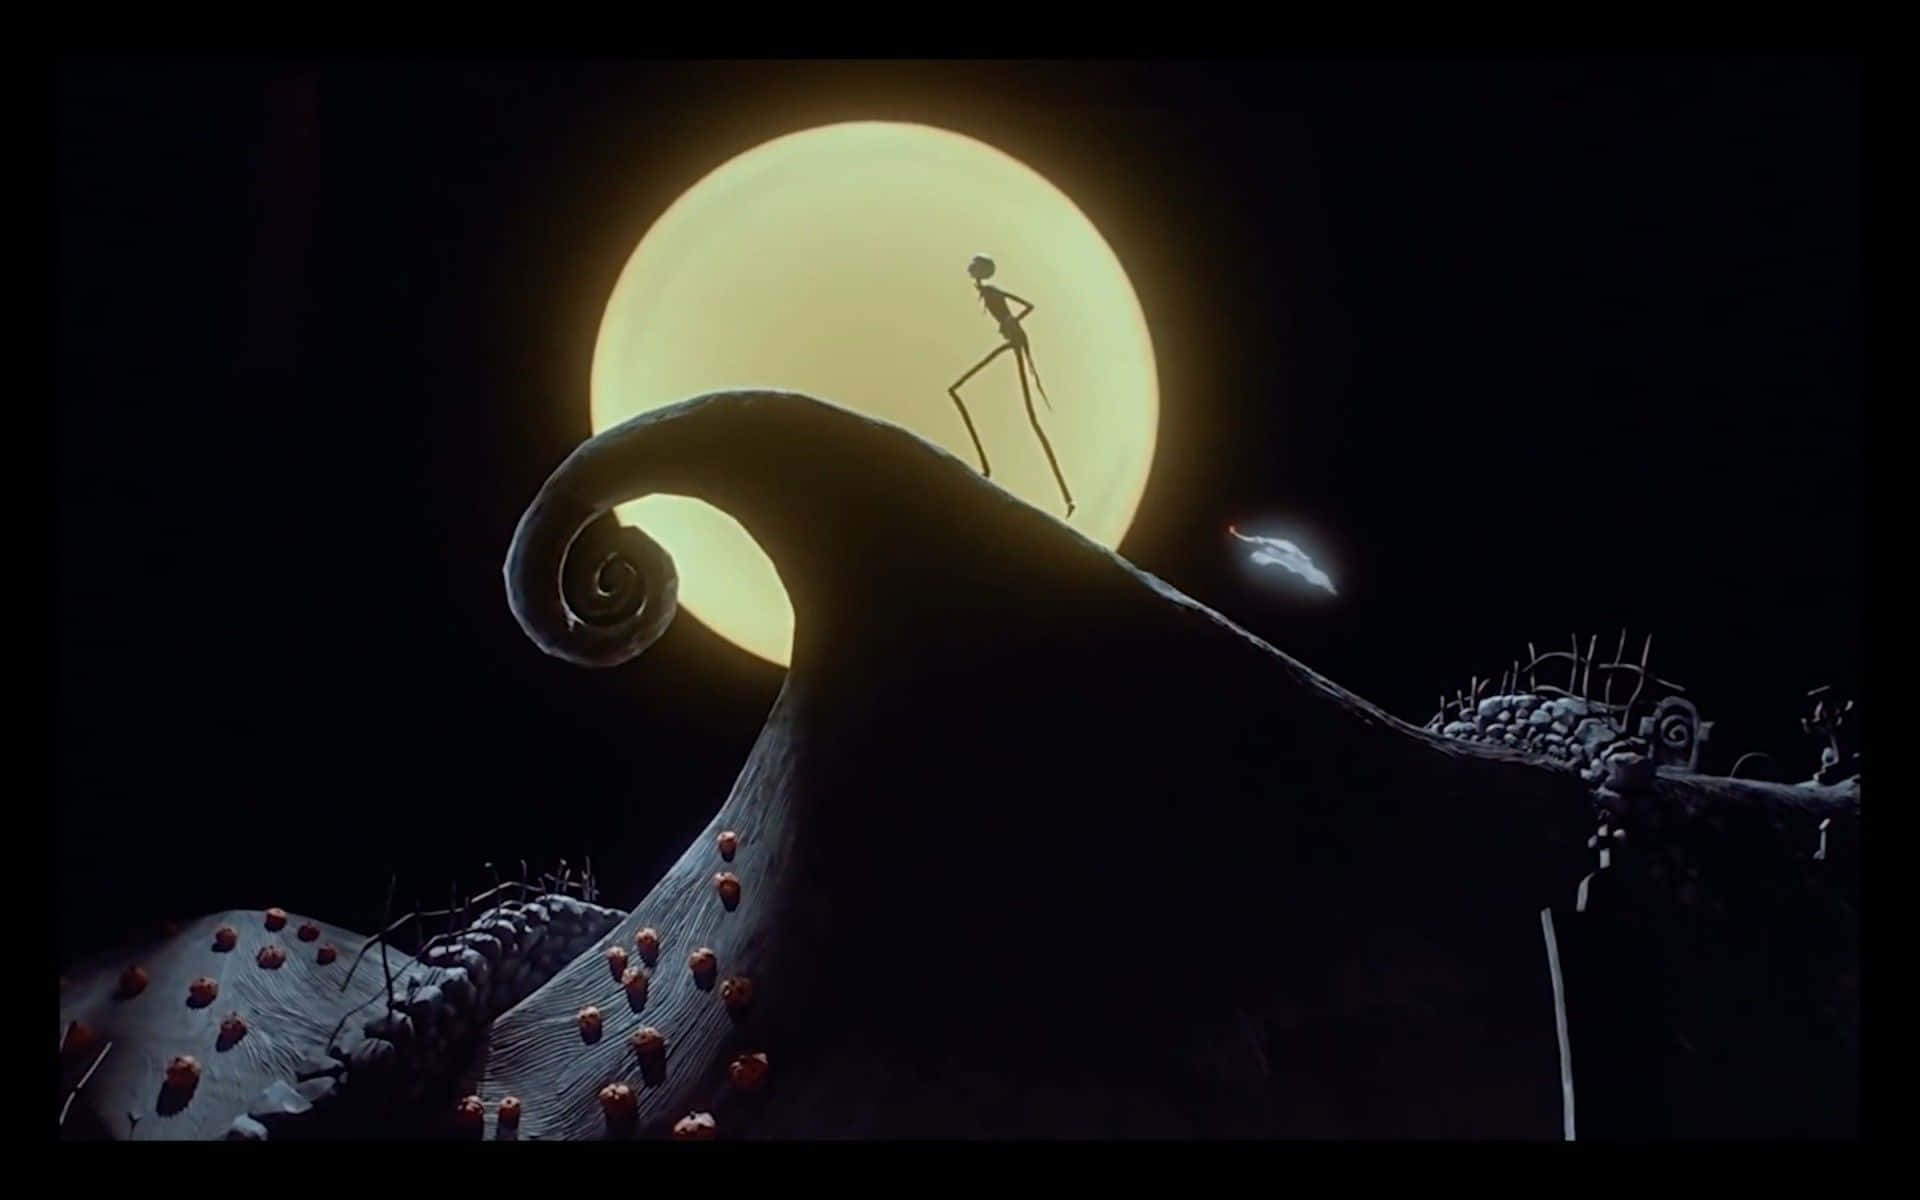 Celebrate Halloween with The Nightmare Before Christmas movie